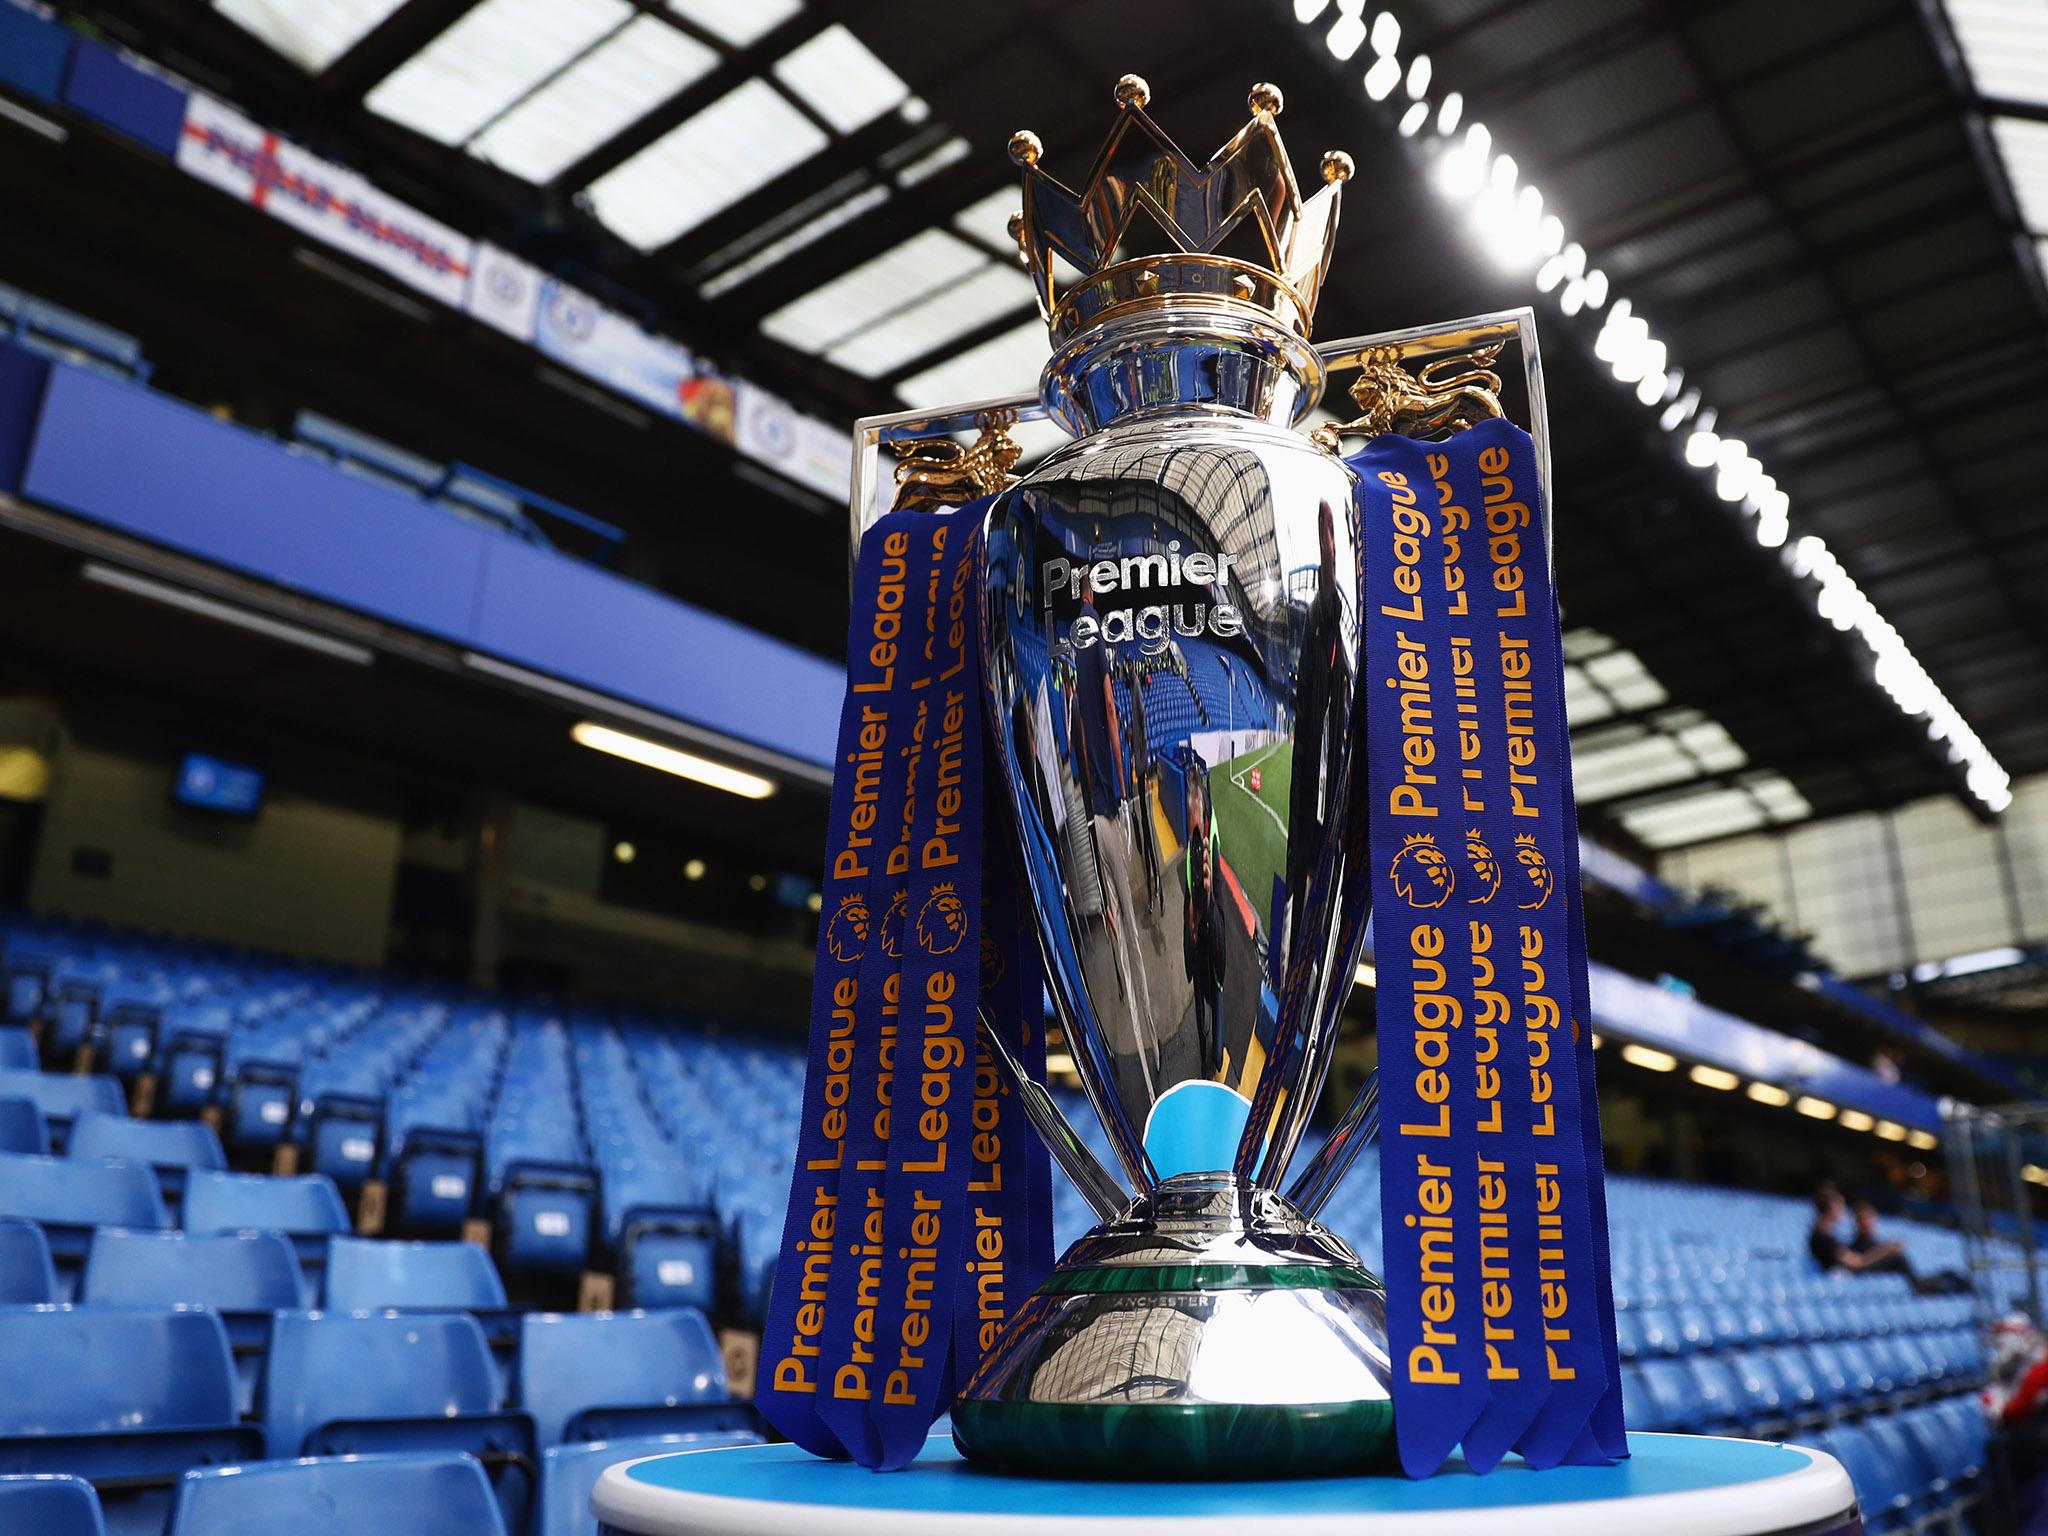 The Premier League has taken a brand new targeted approach, whereby it will aim to shut down pirated content at its source